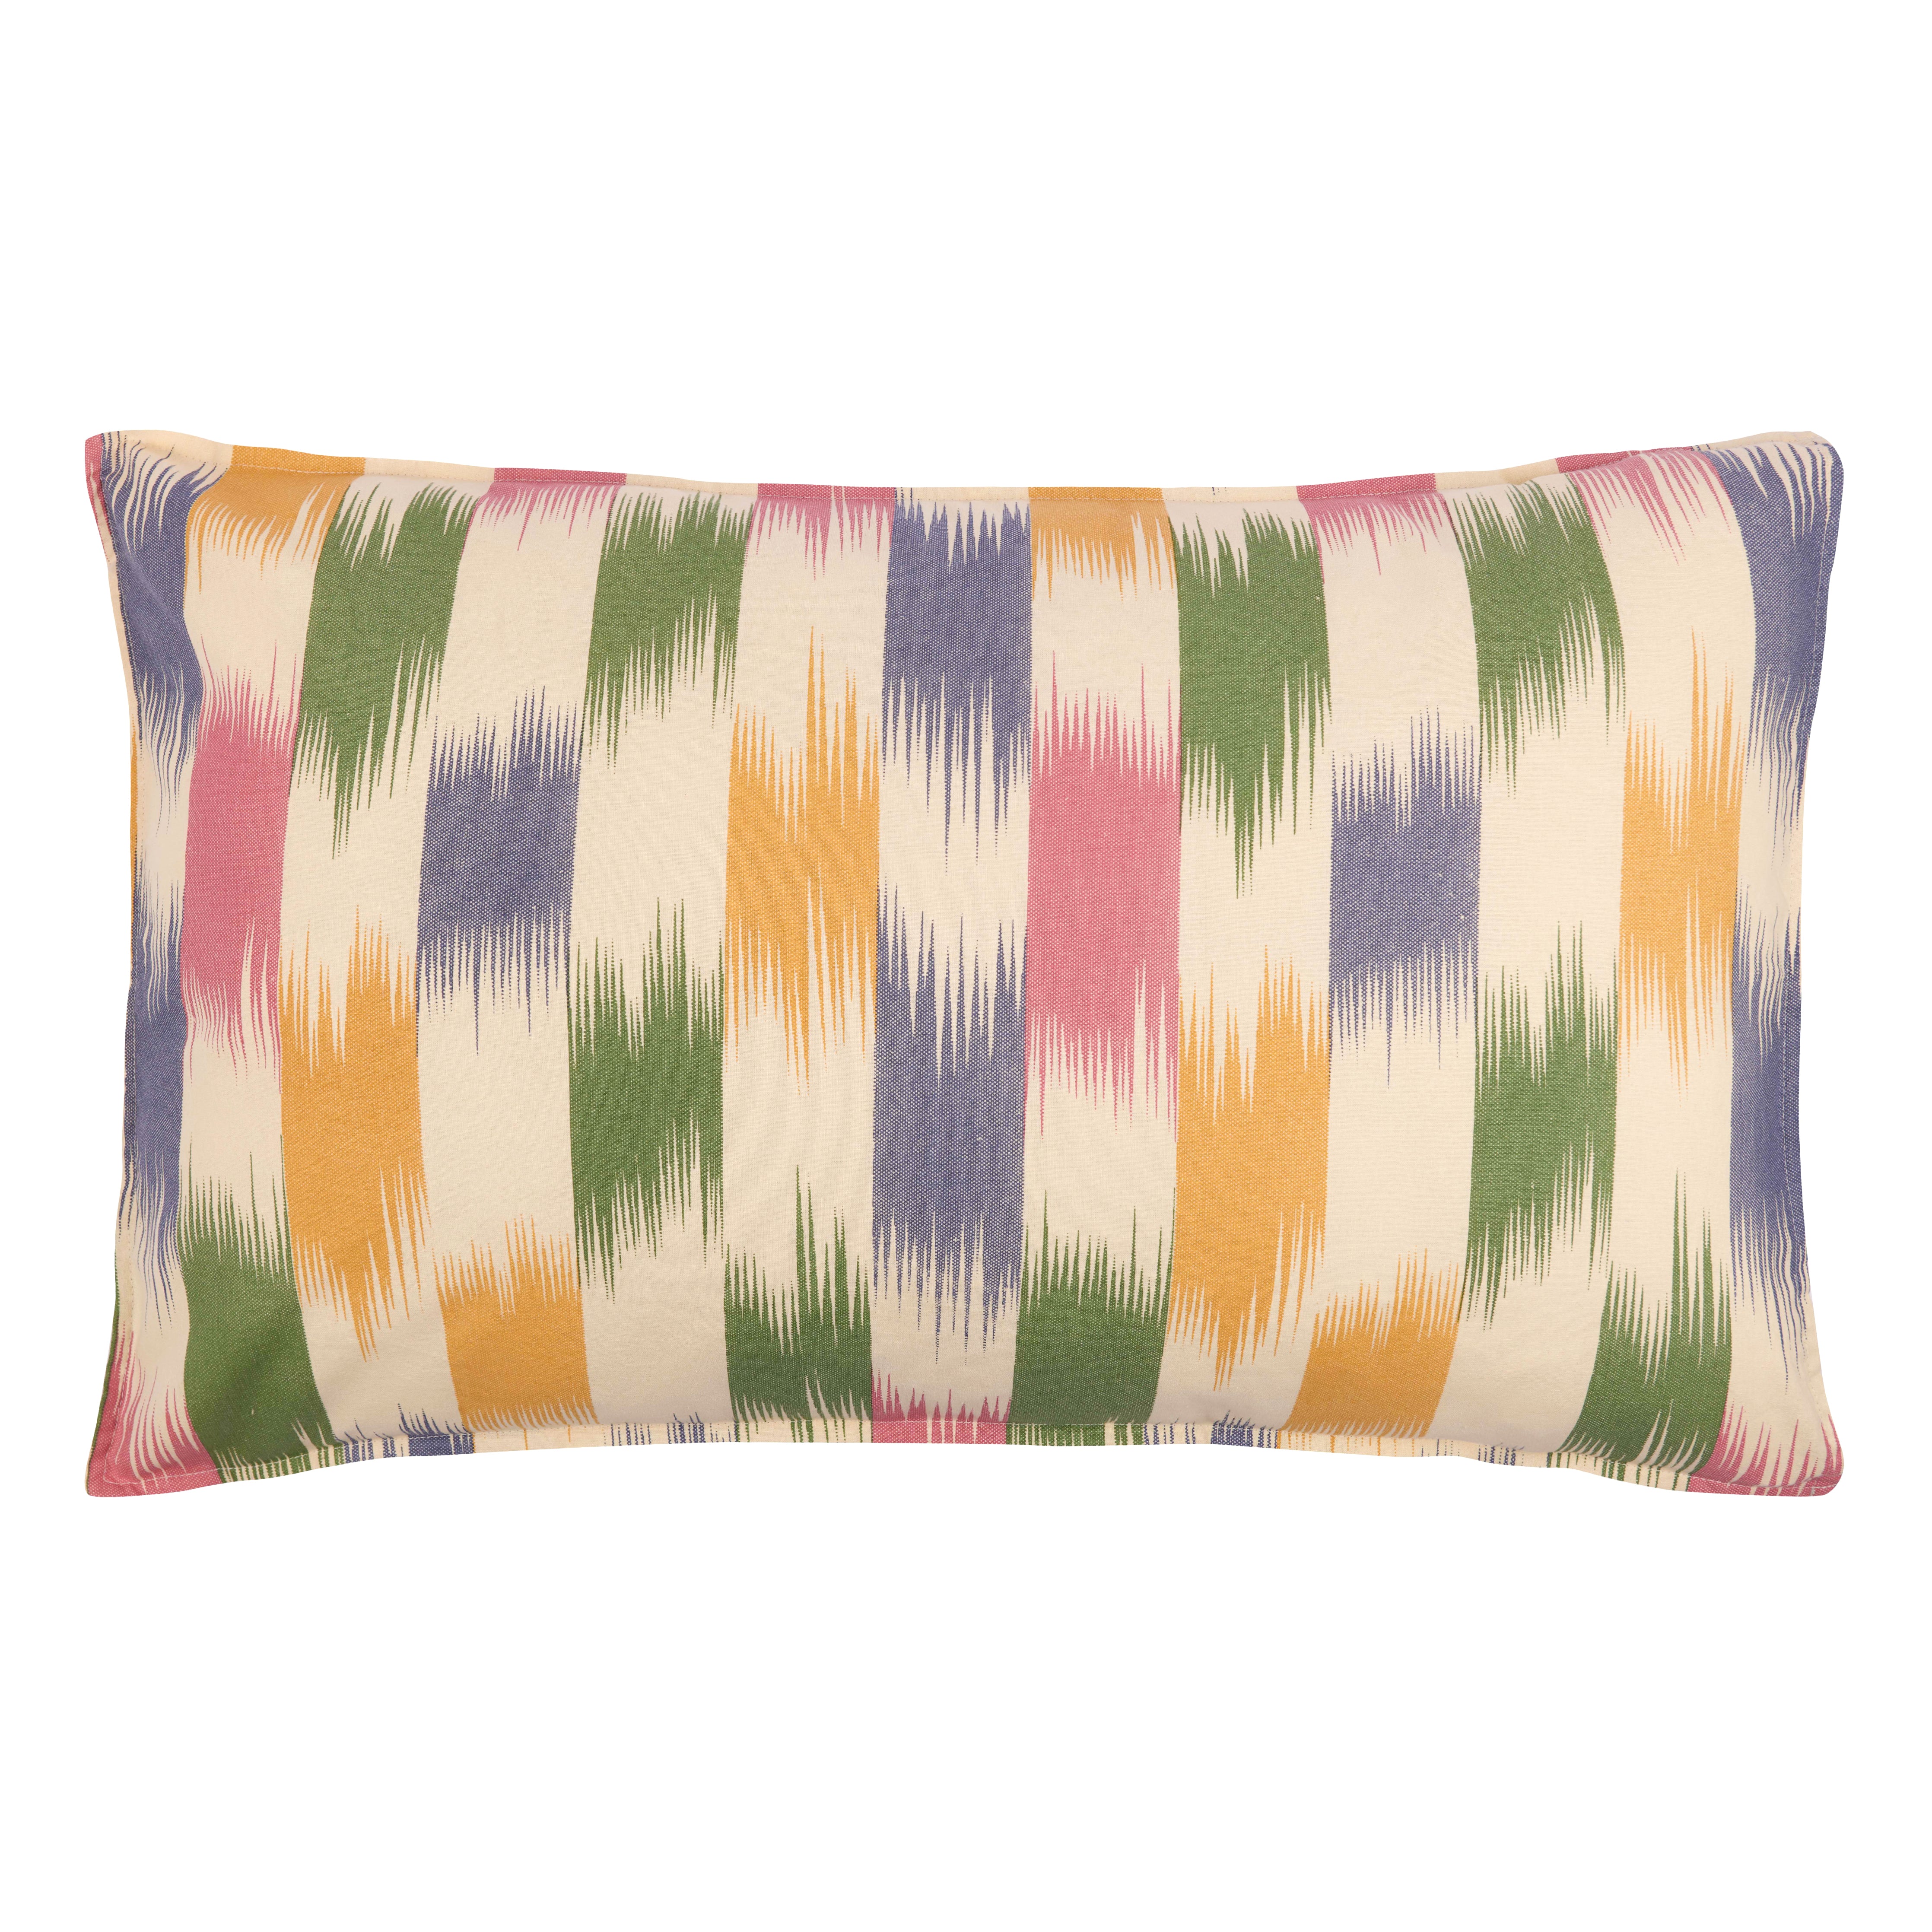 Pillow Cover - Brush Ikat Warm Olive